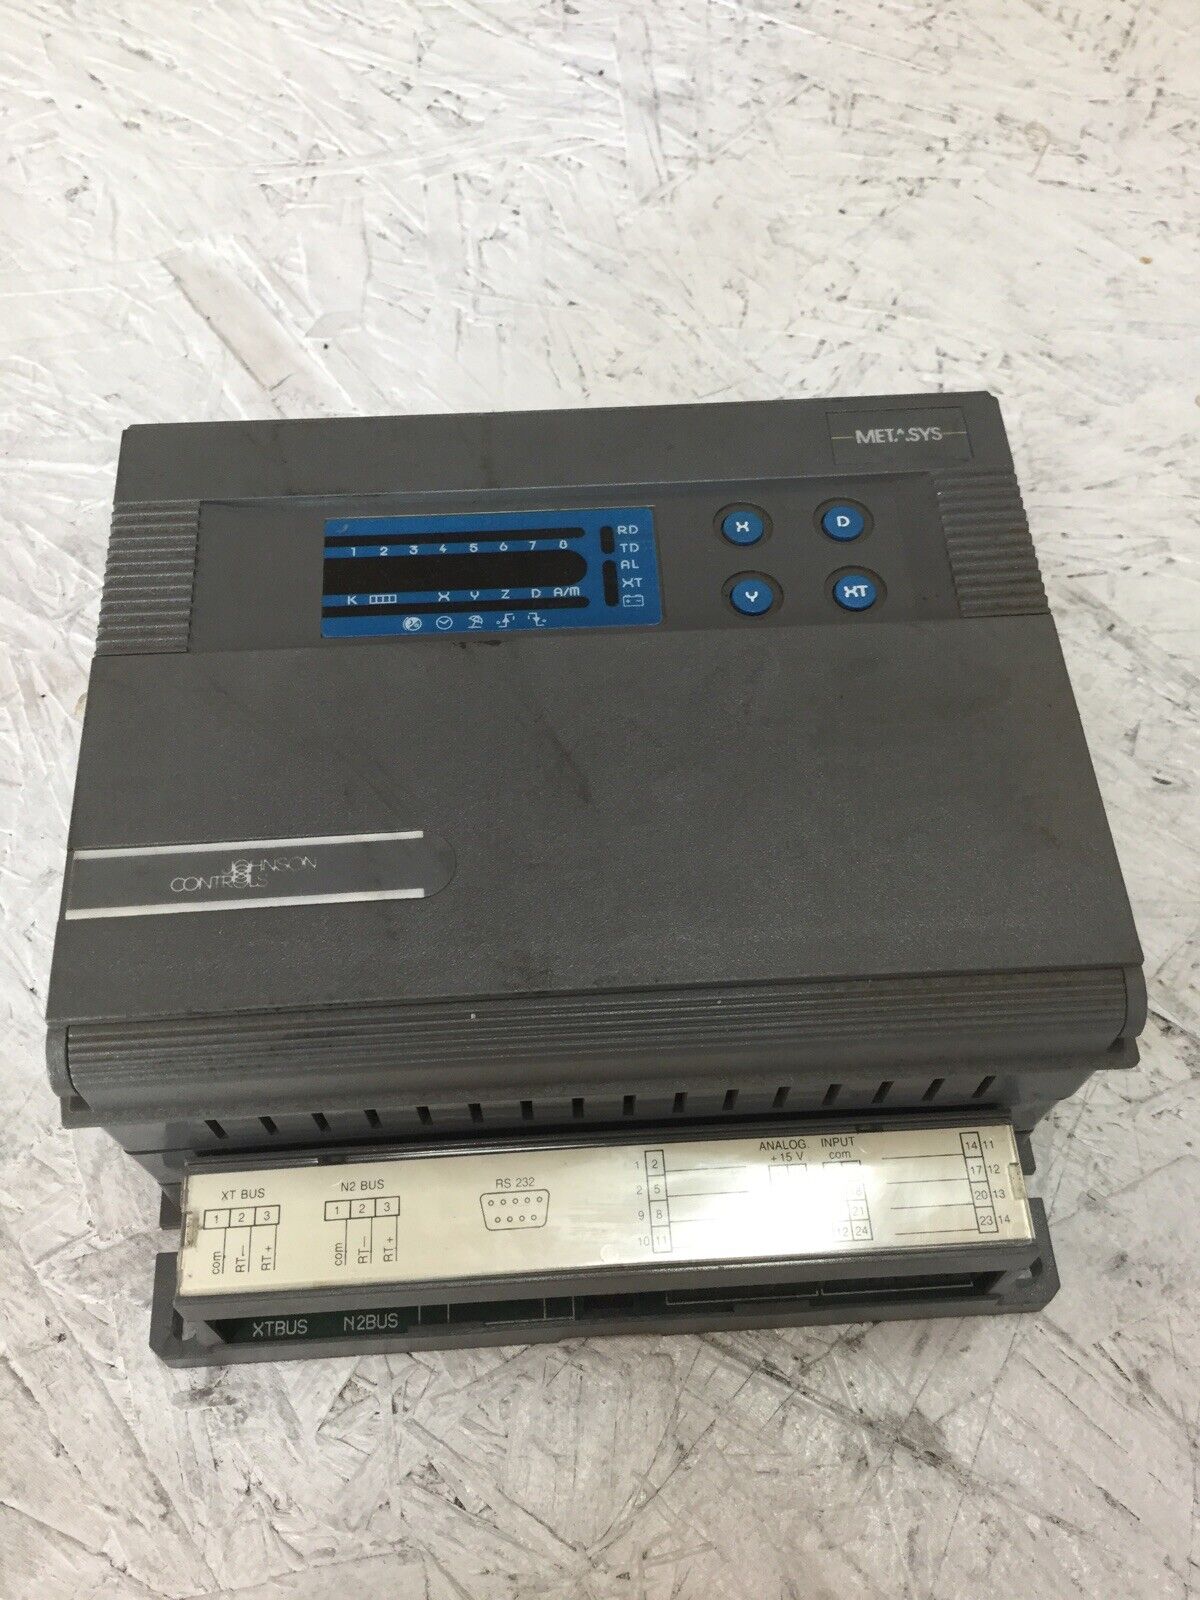 Johnson Controls Metasys DX-9100-8454 Digital Controller with base